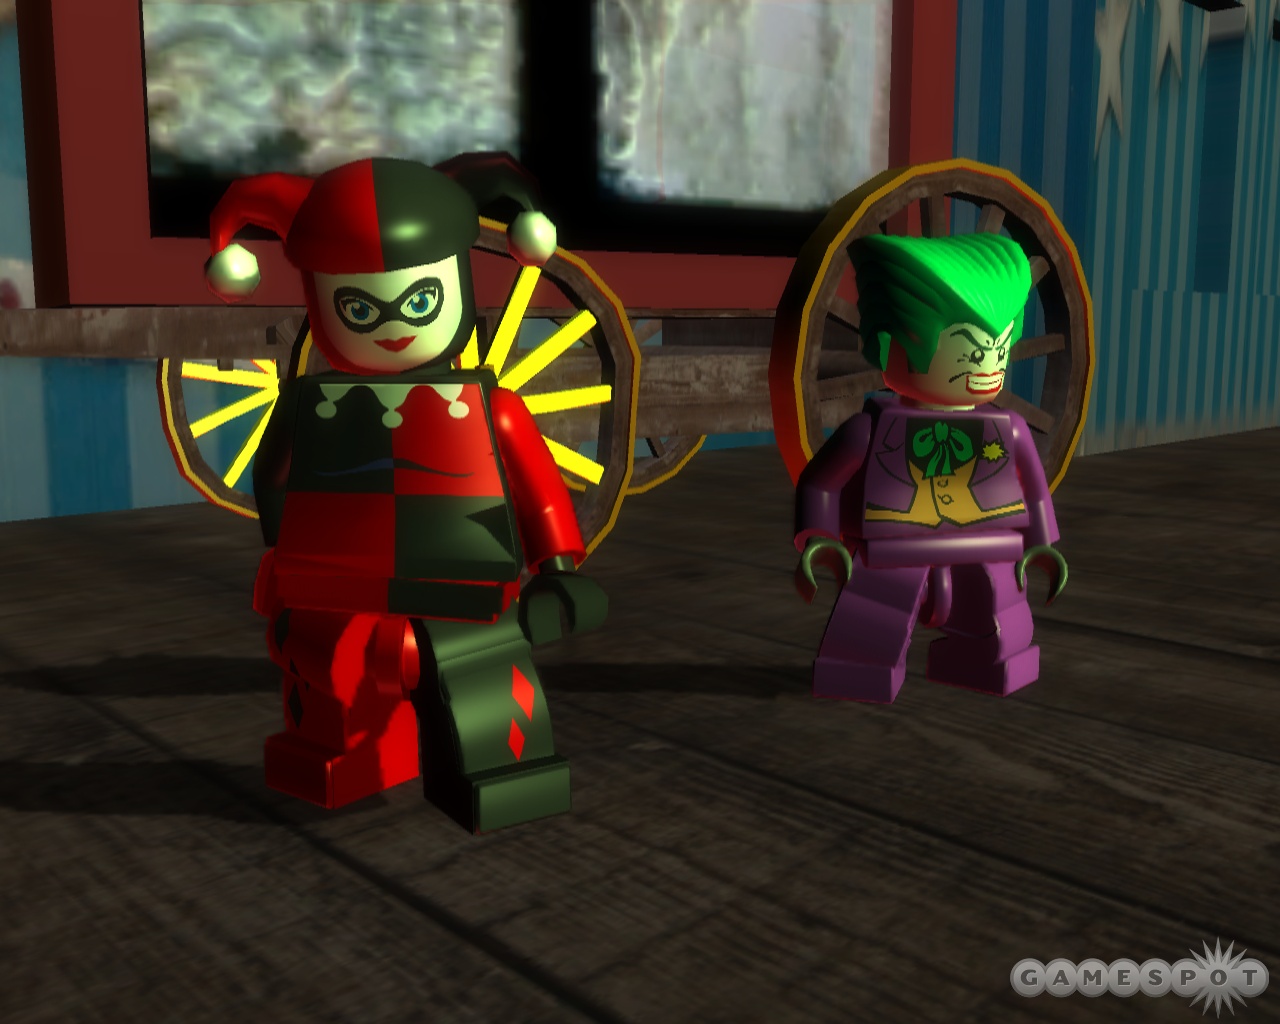 Harley Quinn and the Joker are just two of the many villains making trouble in Lego Batman.